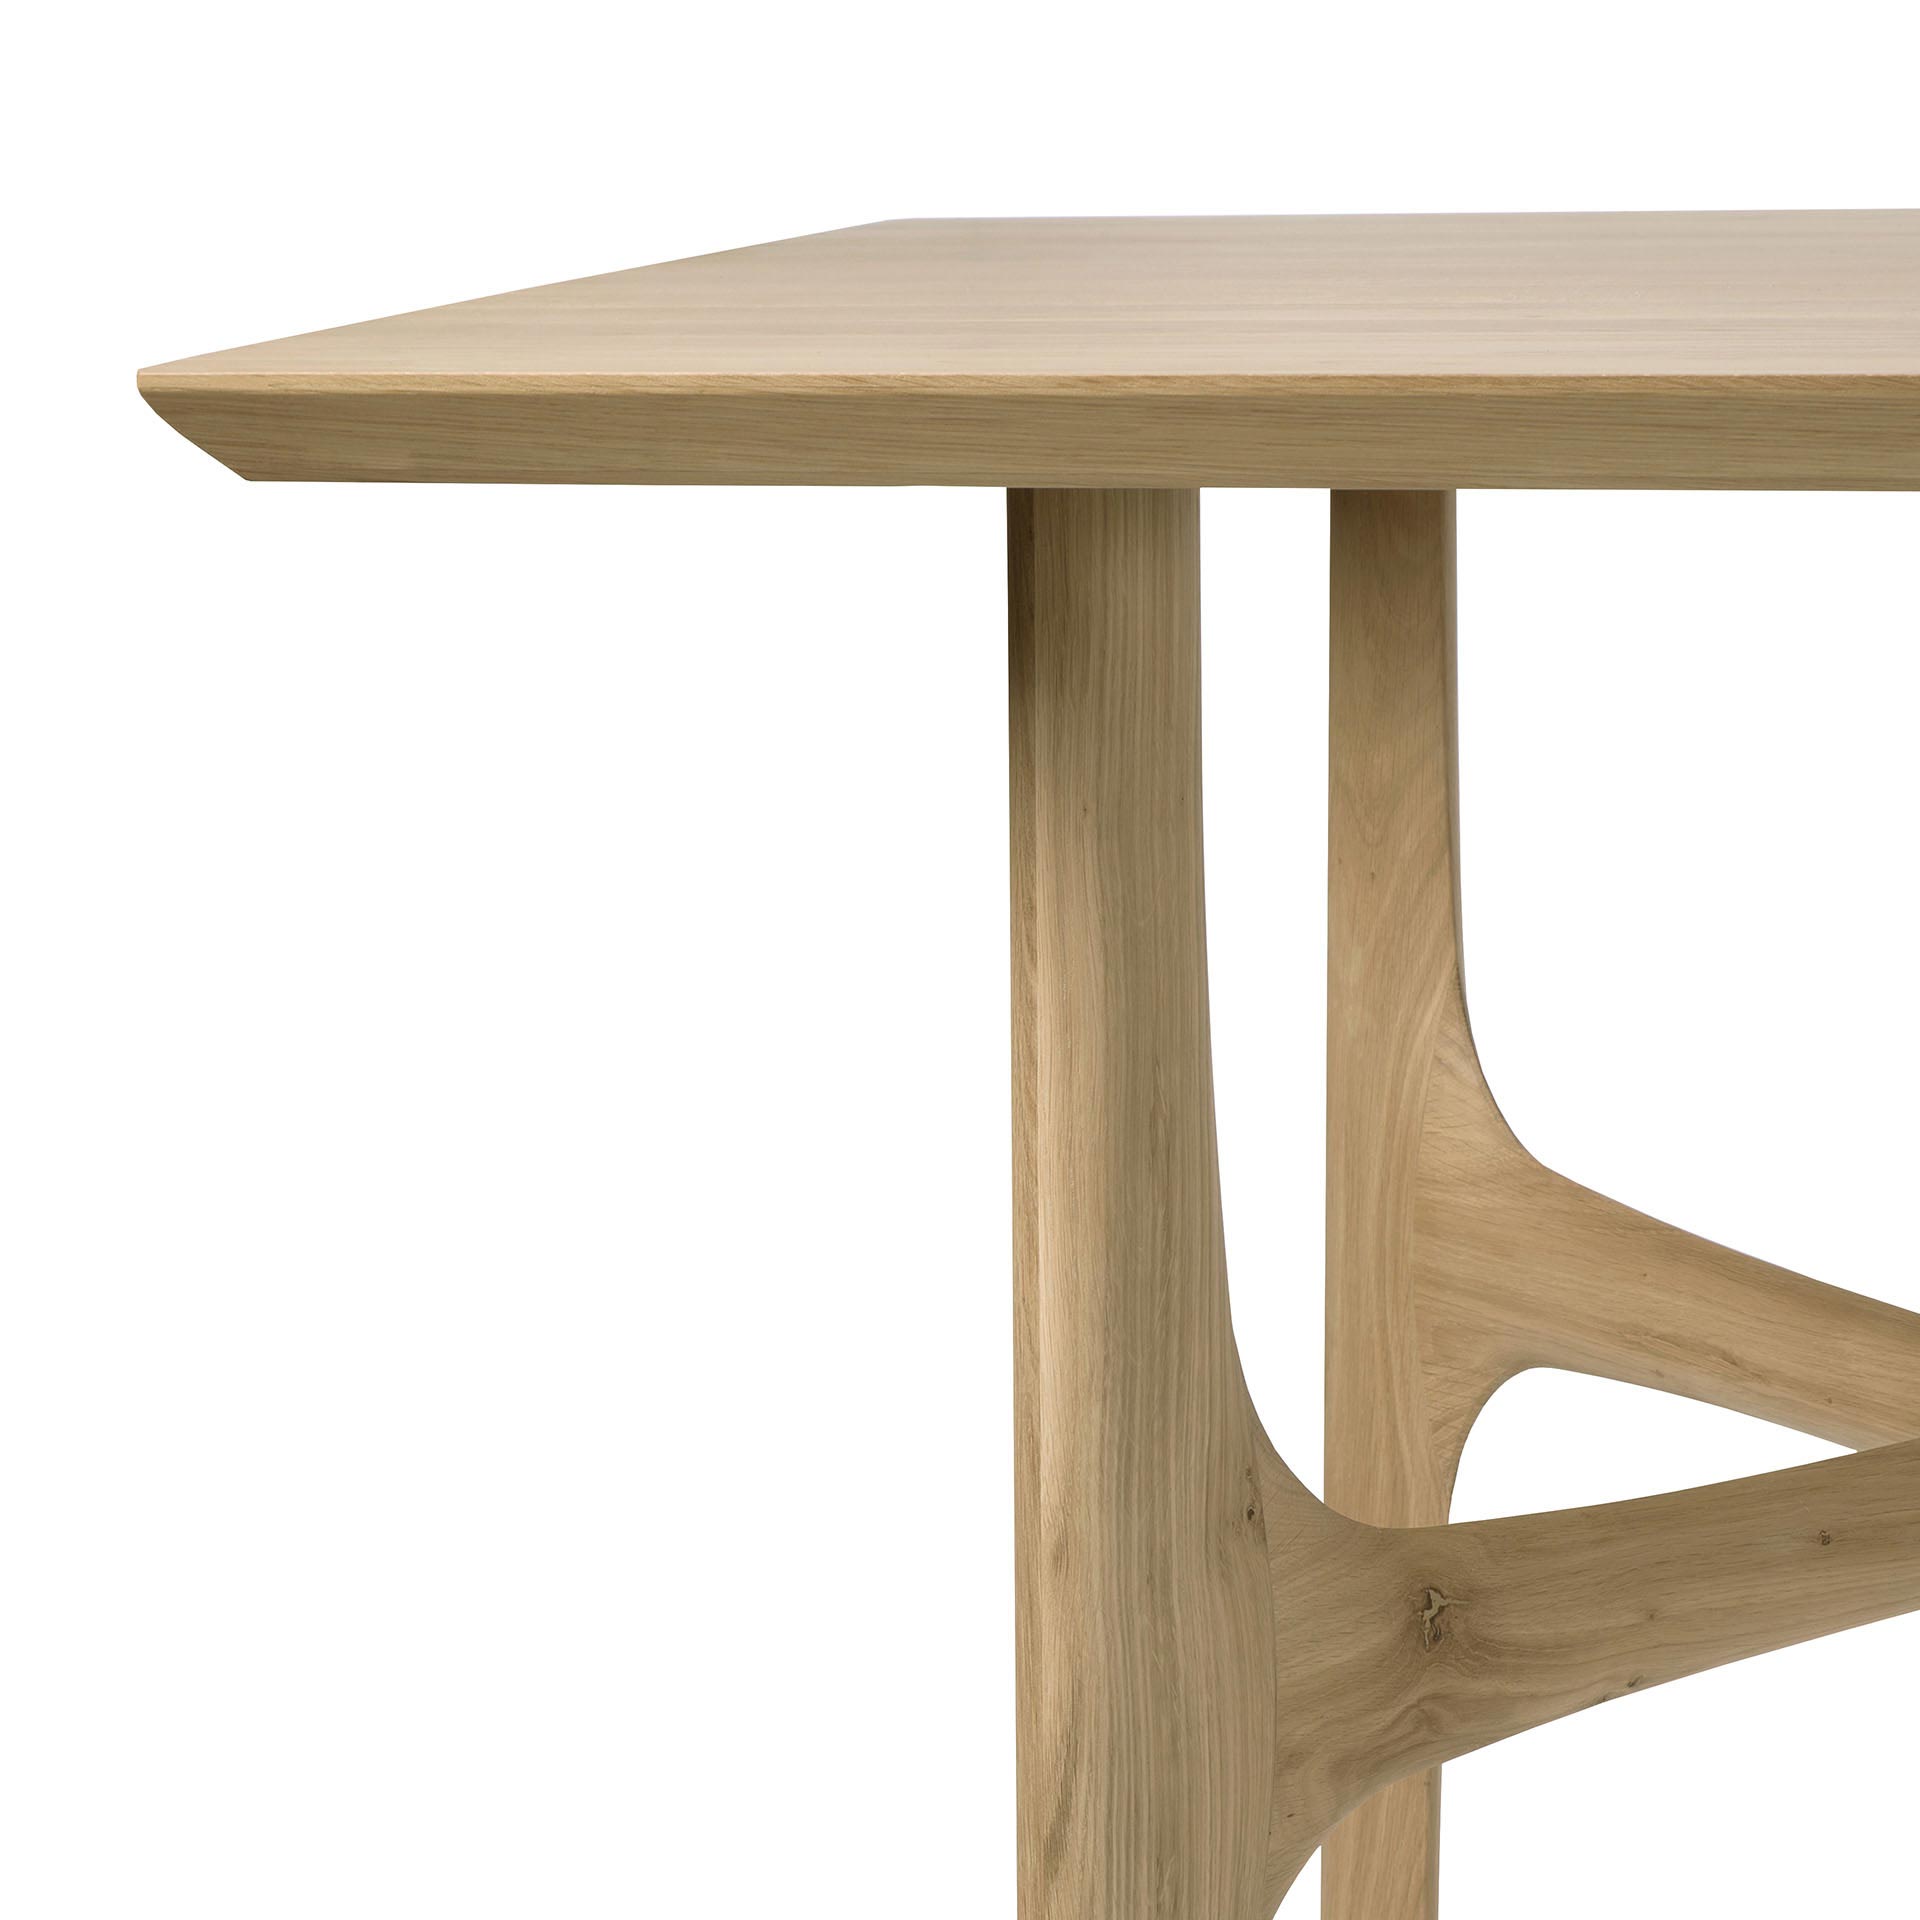 Nexus Dining table by Ethnicraft